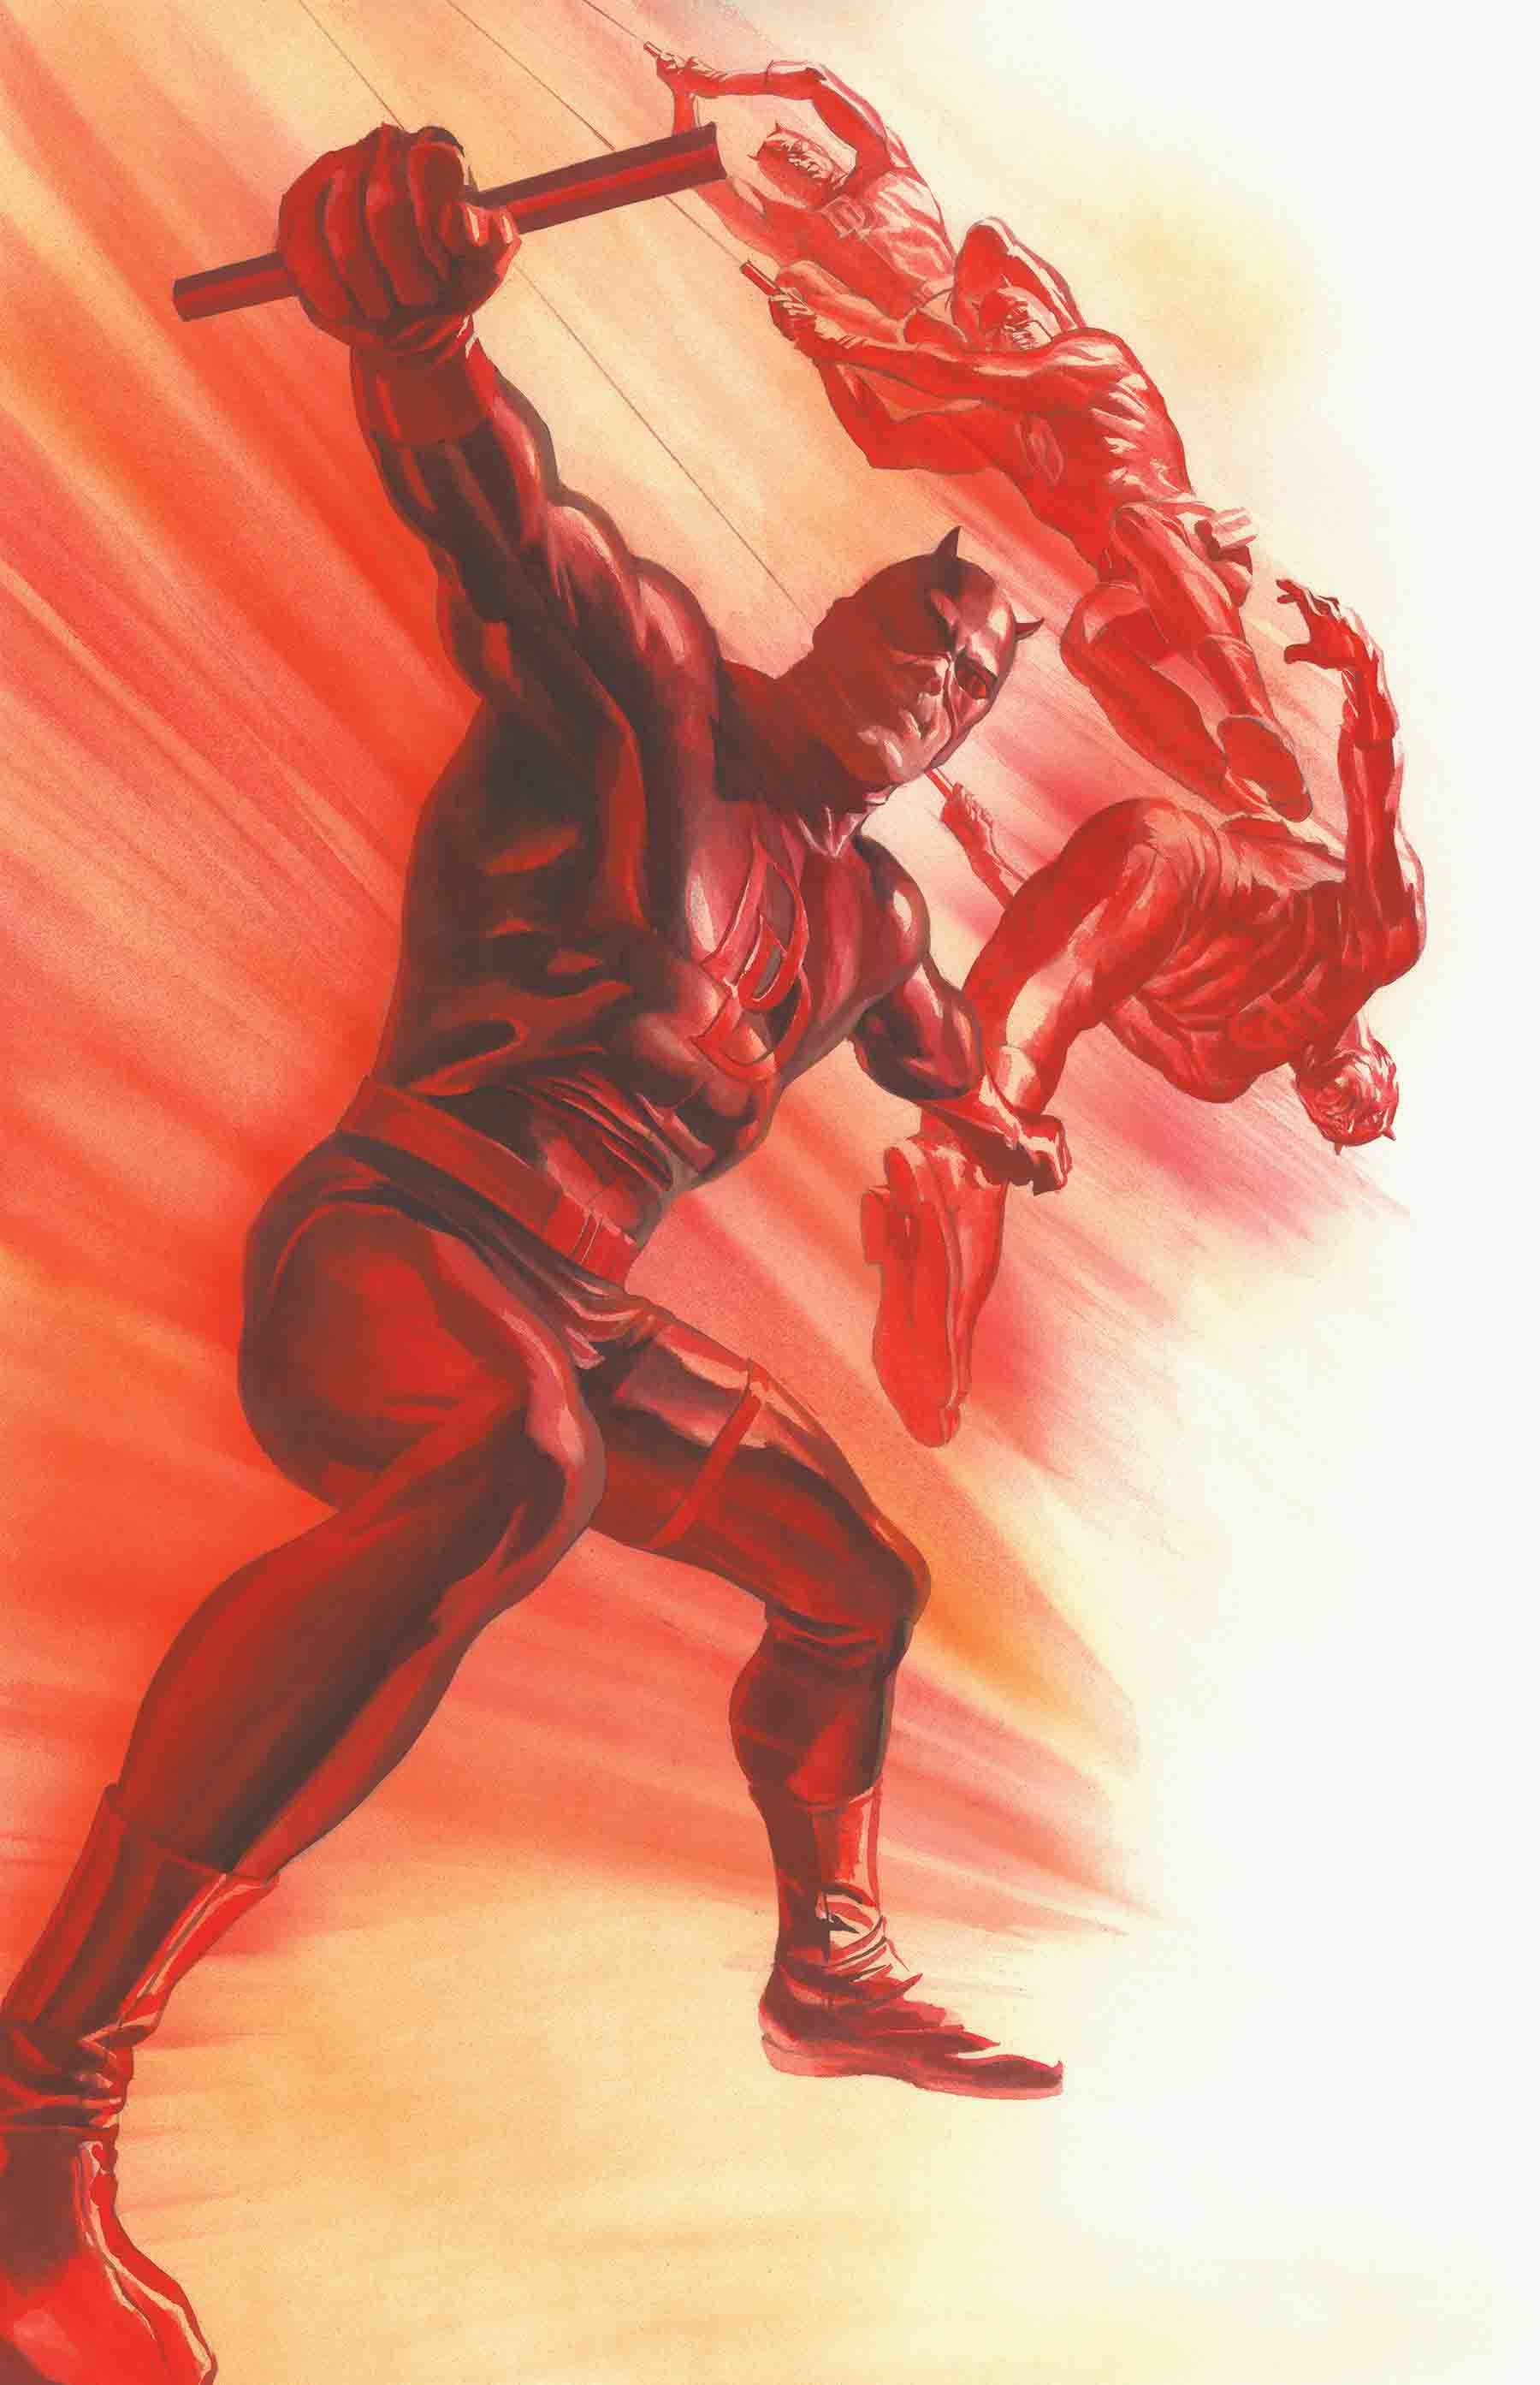 DAREDEVIL POSTER #600 BY ALEX ROSS